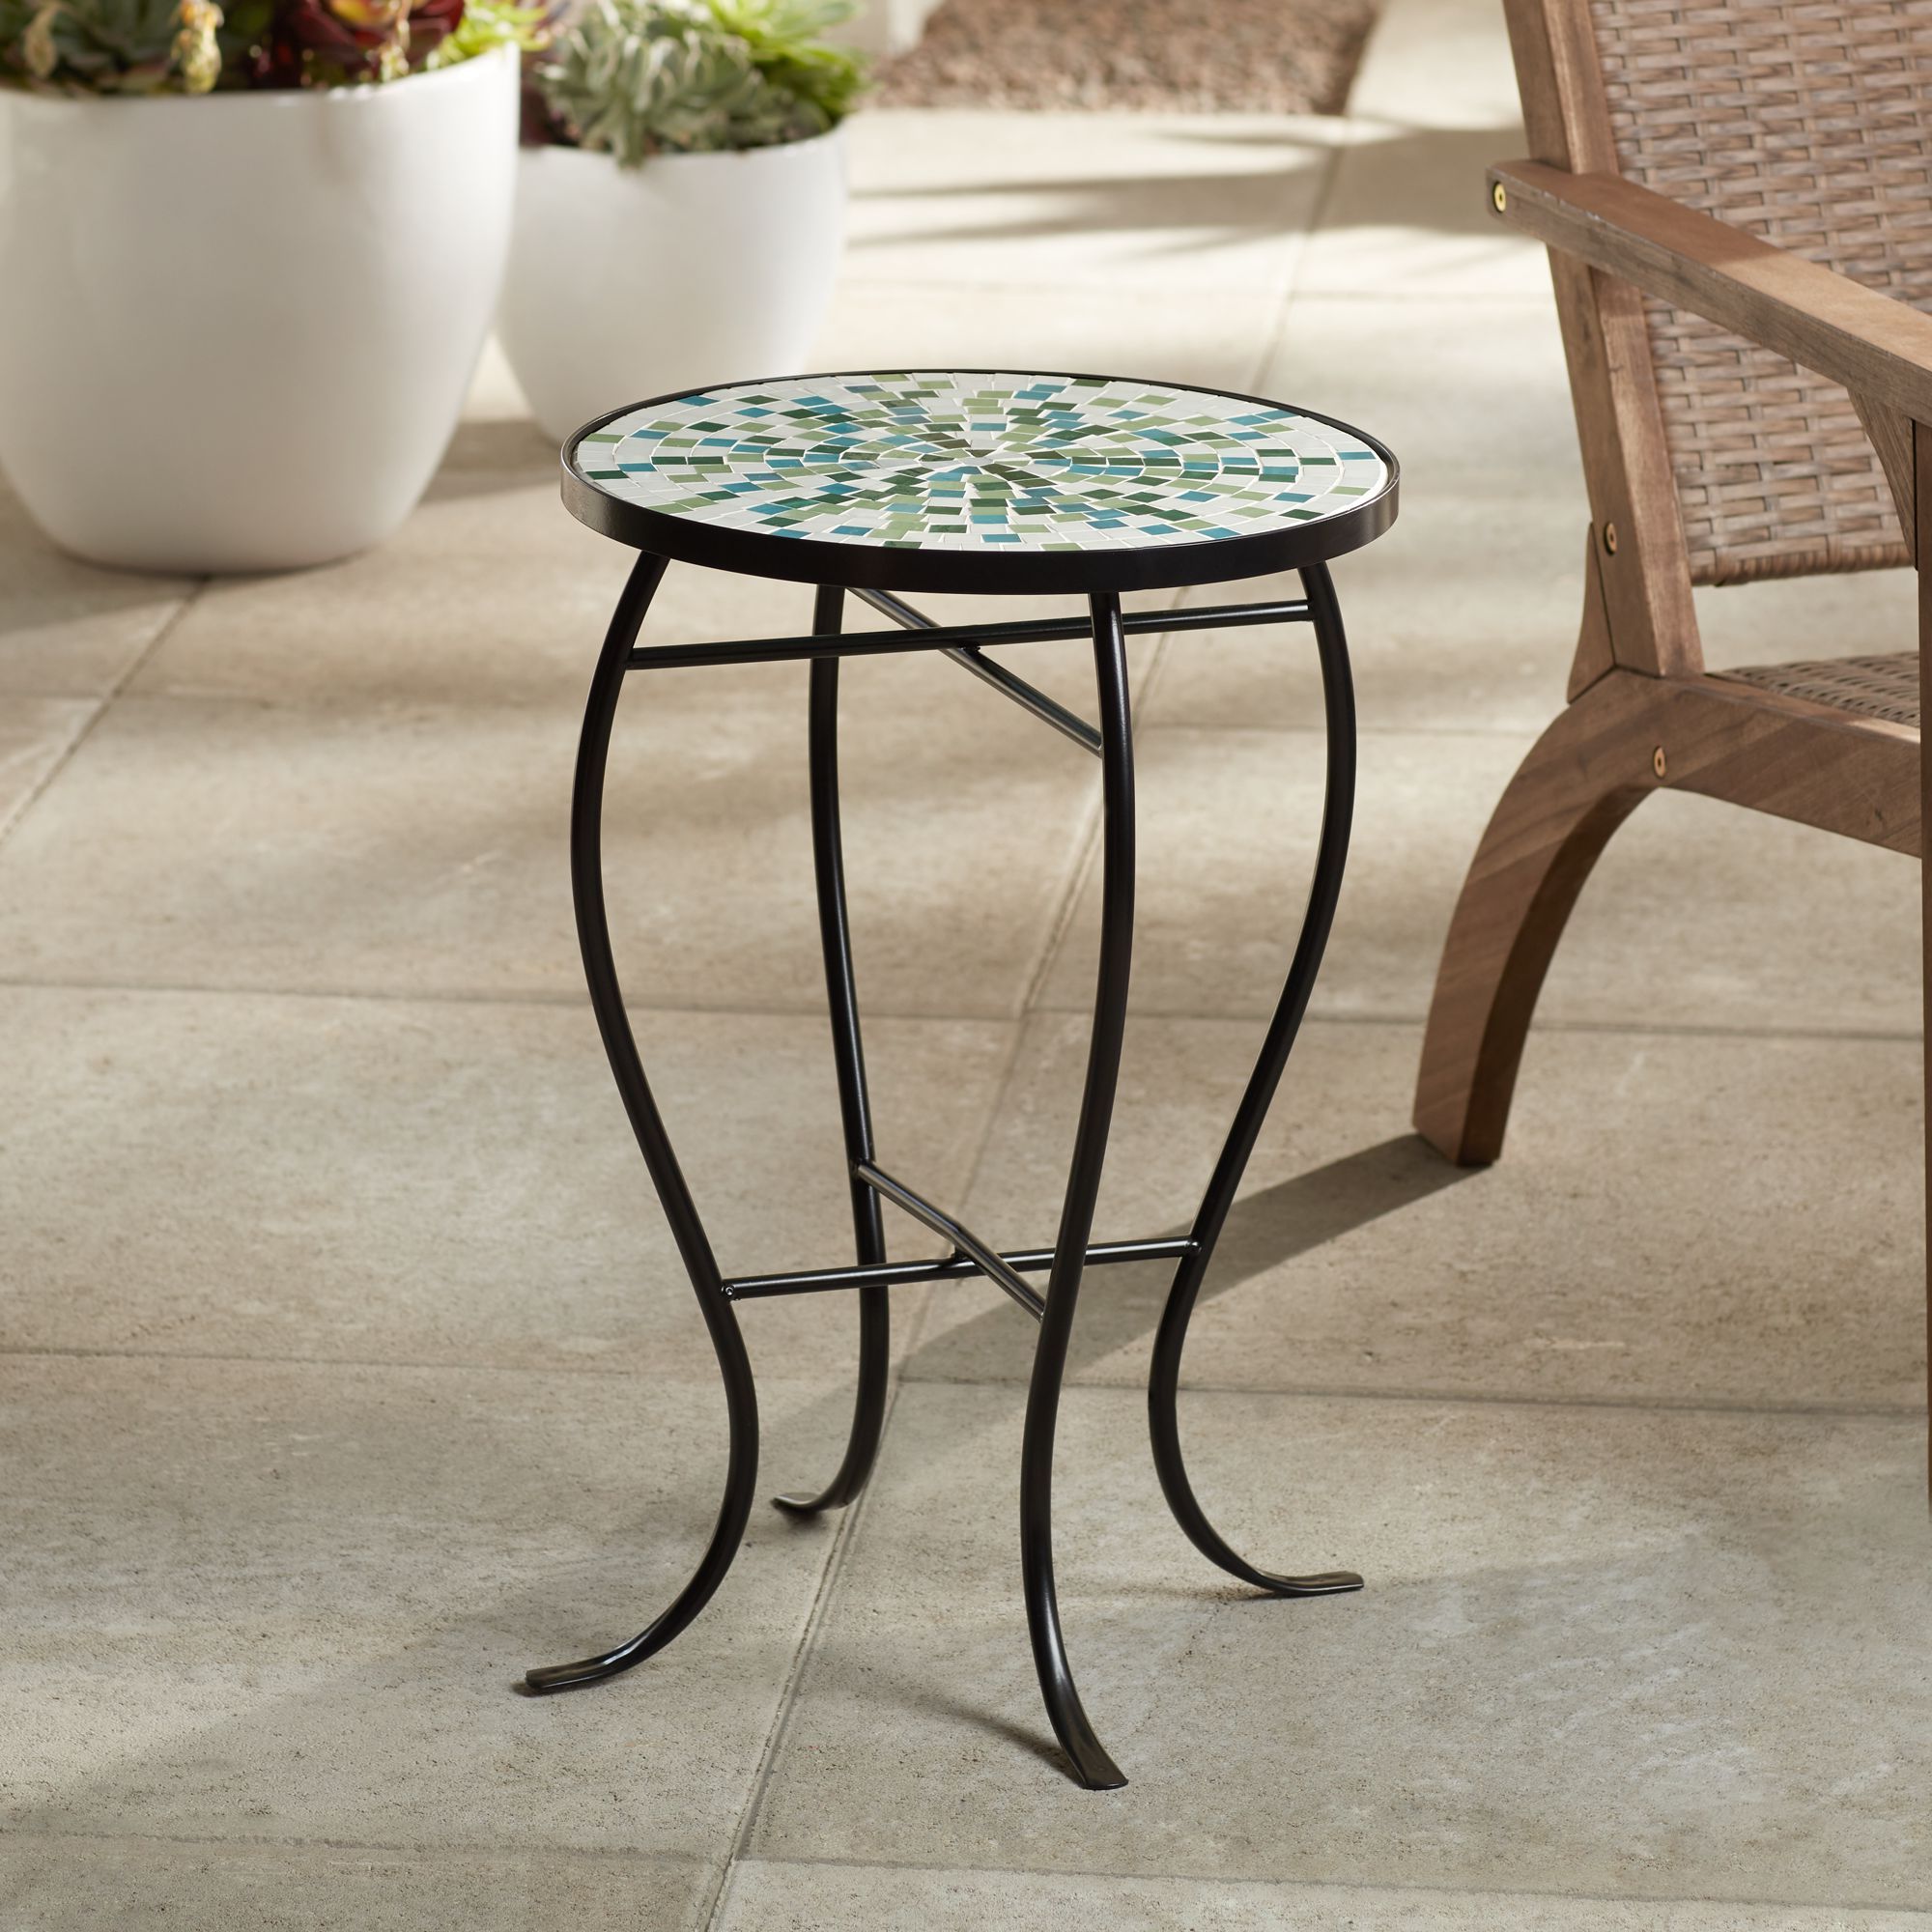 Most Up To Date Ocean Mosaic Outdoor Accent Tables Throughout Blue Mosaic Outdoor Coffee Table : Amazon Com Teal Island Designs Blue (View 4 of 15)